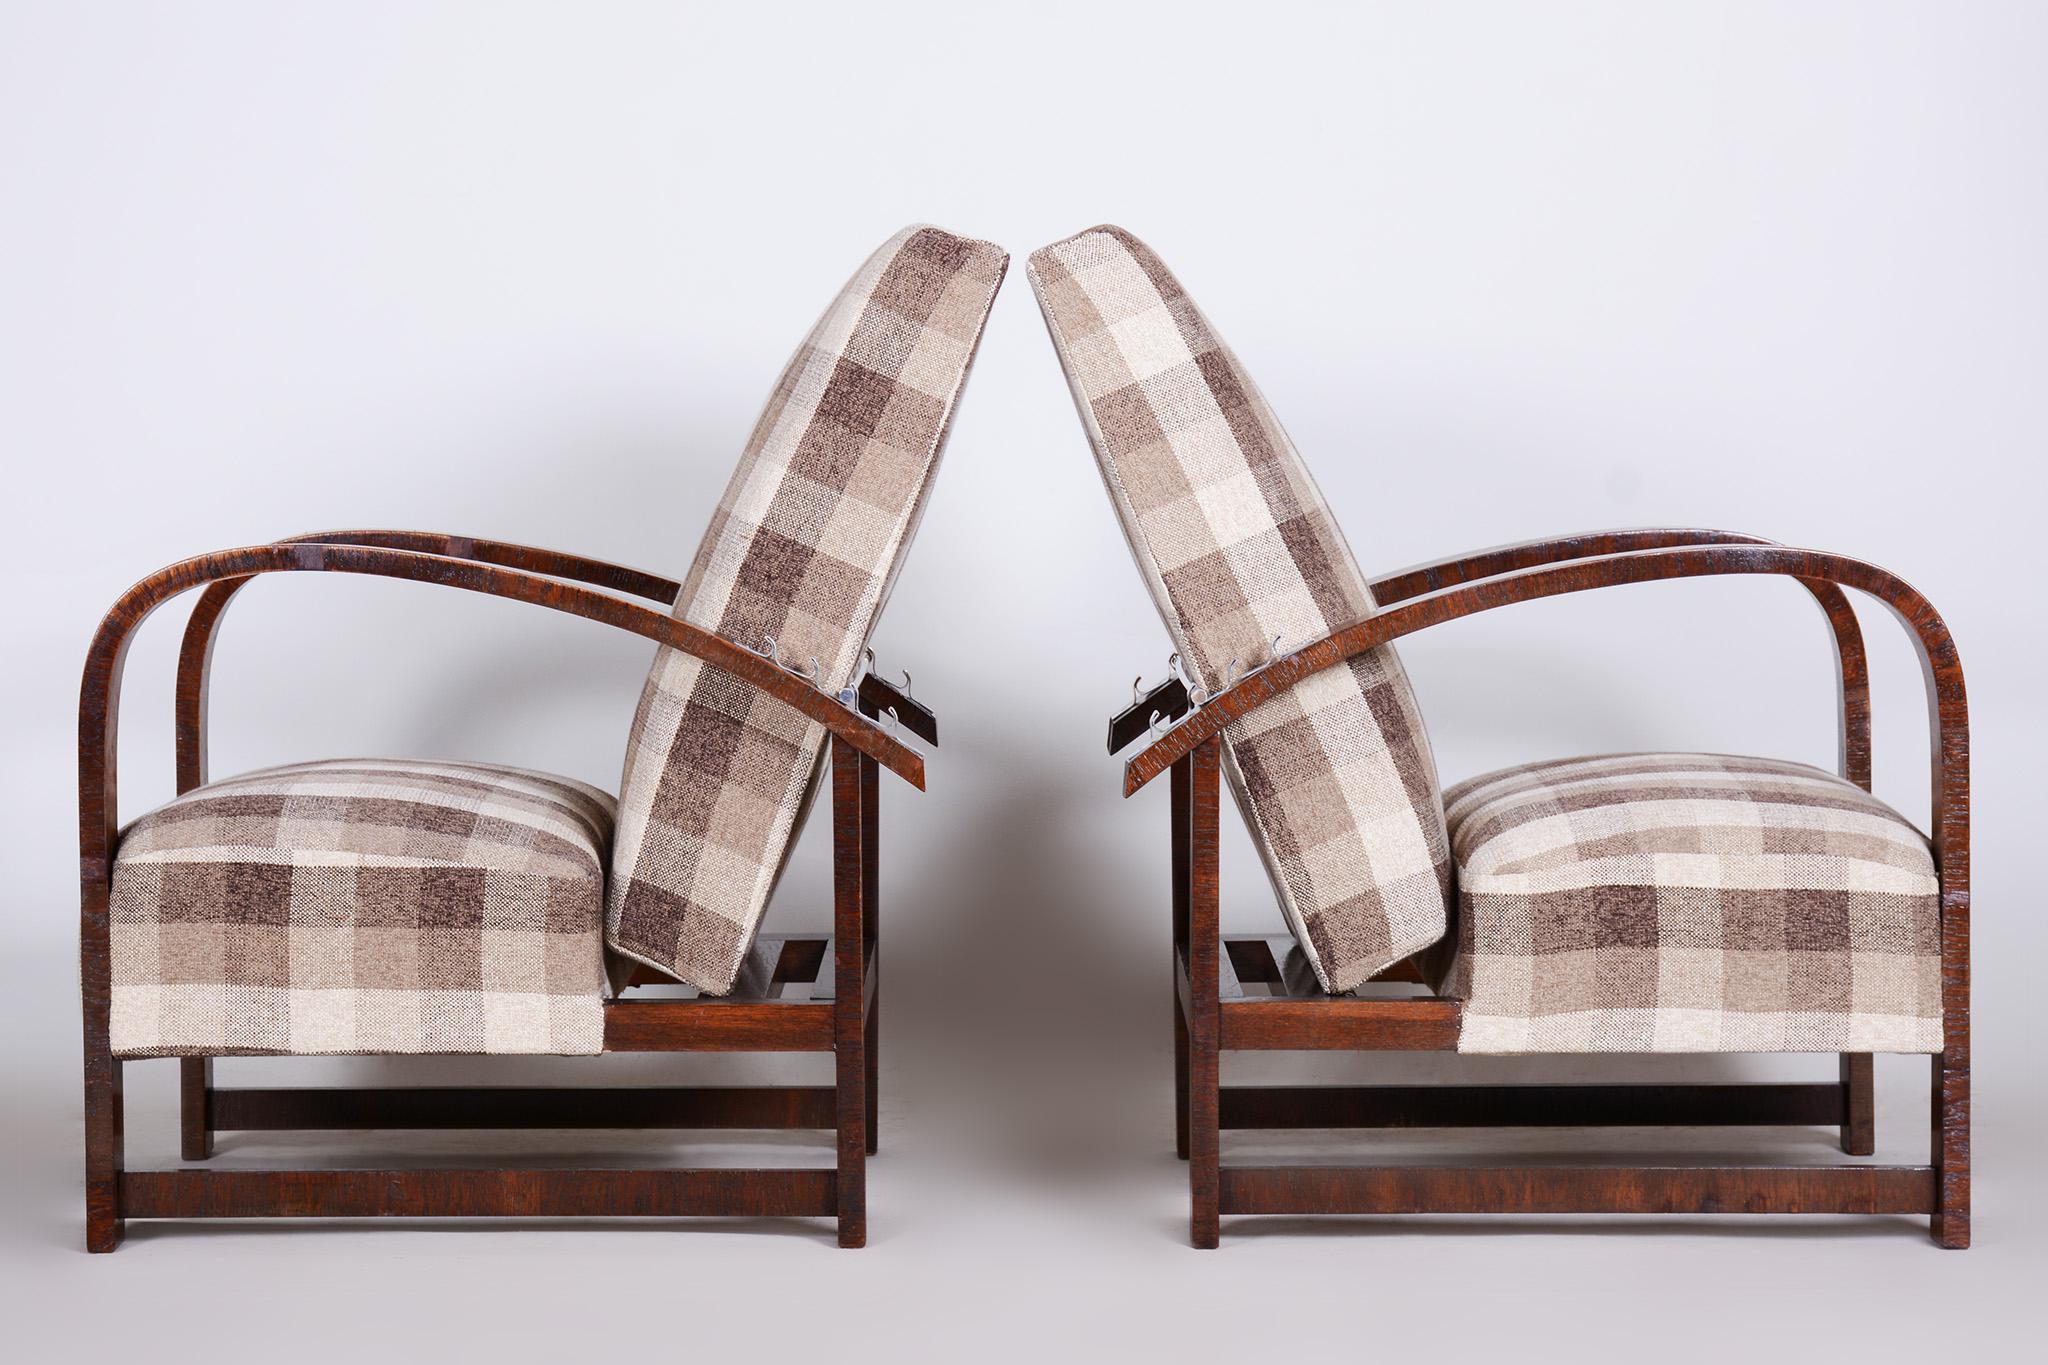 Wood Pair of Reclining Art Deco Armchairs Made in the 1930s, Fully Refurbished Oak